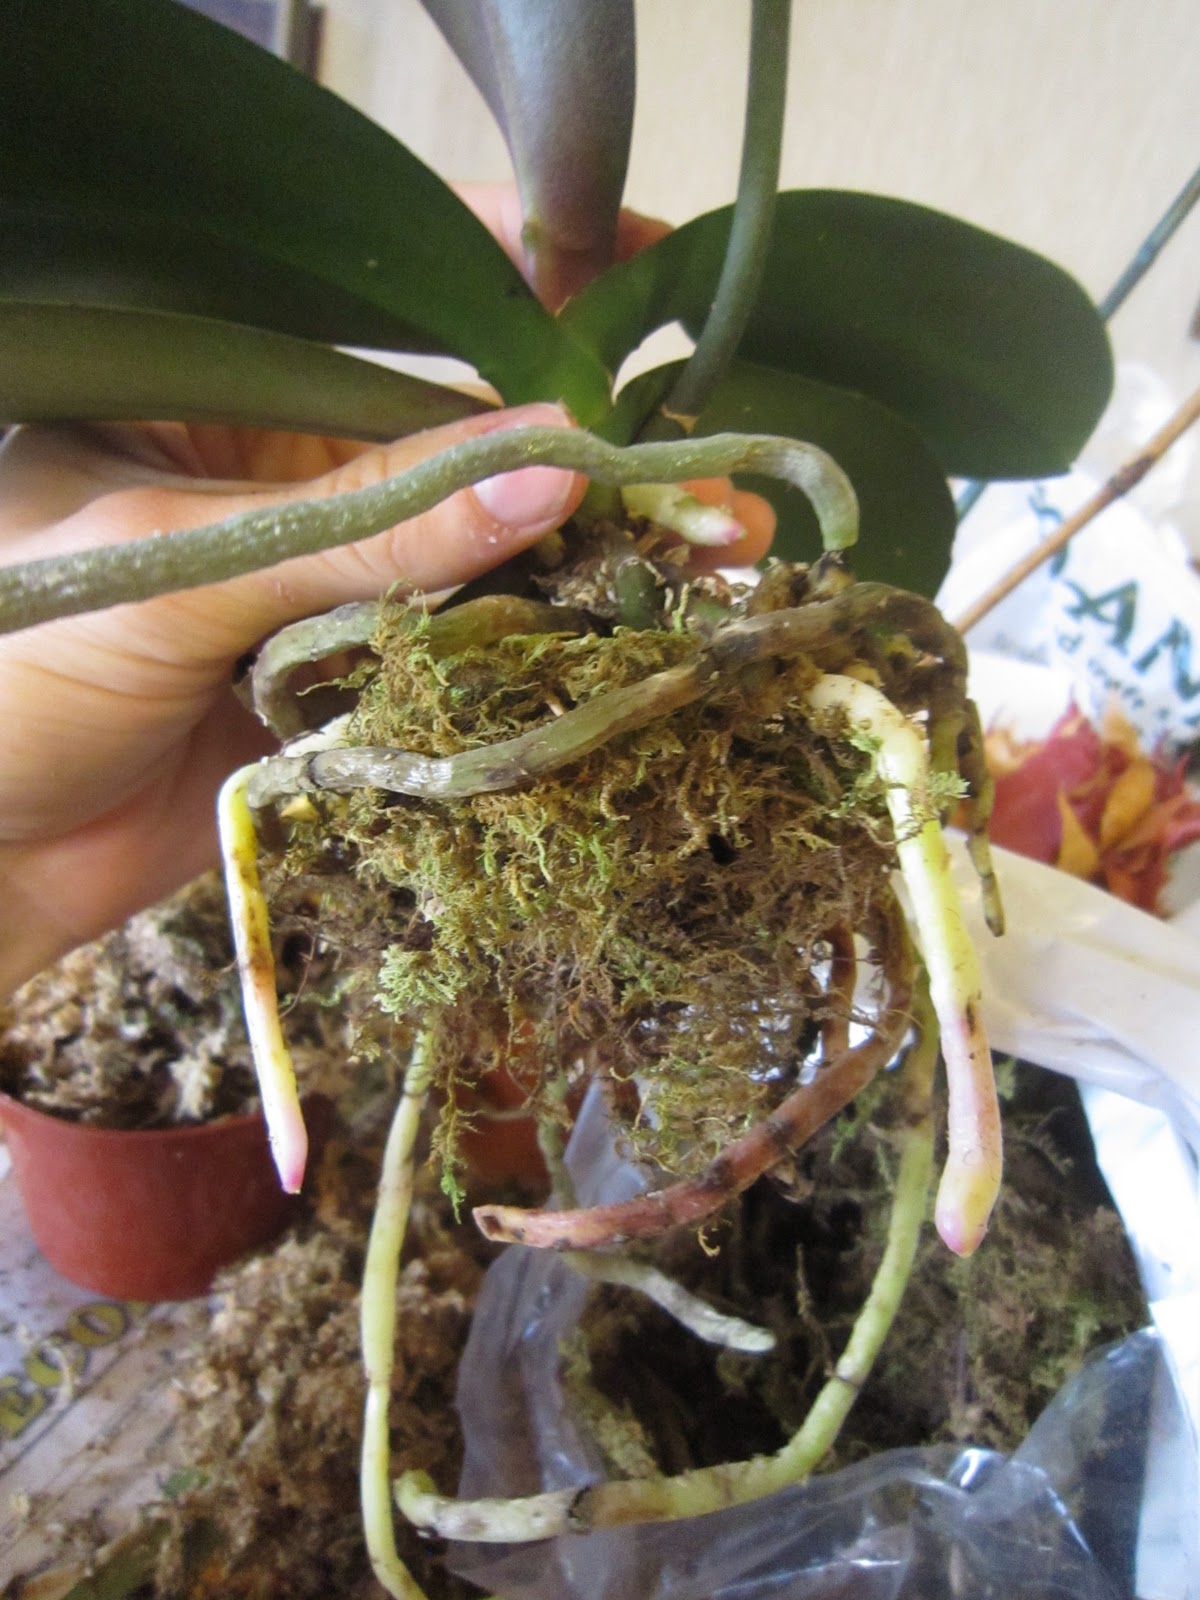 Chuck Does Art: Re-potting Phalaenopsis Orchids in Sphagnum Moss